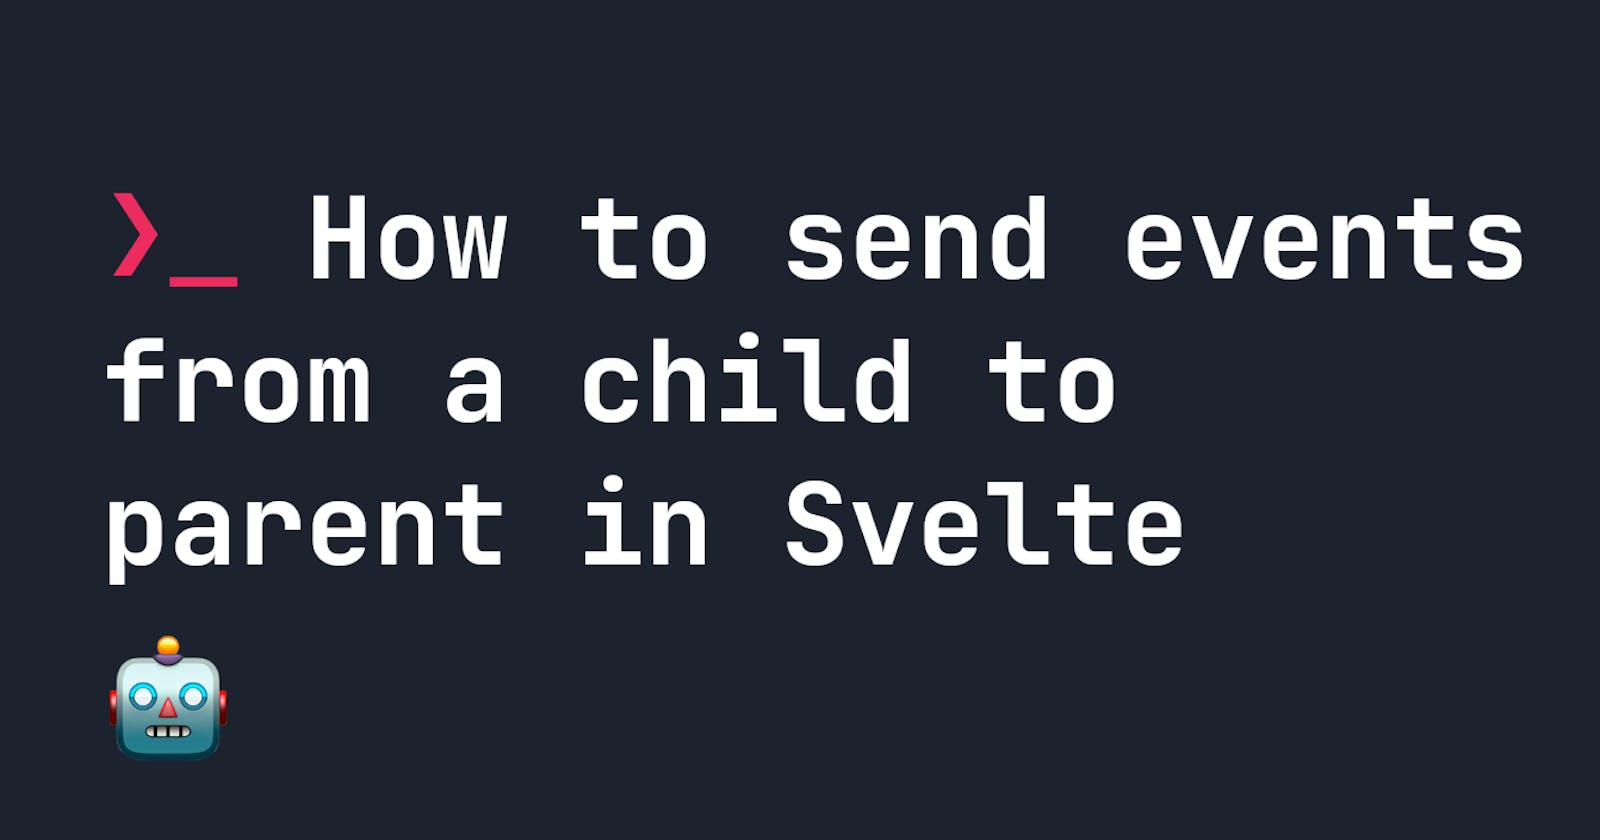 How to send events from a child to parent in Svelte